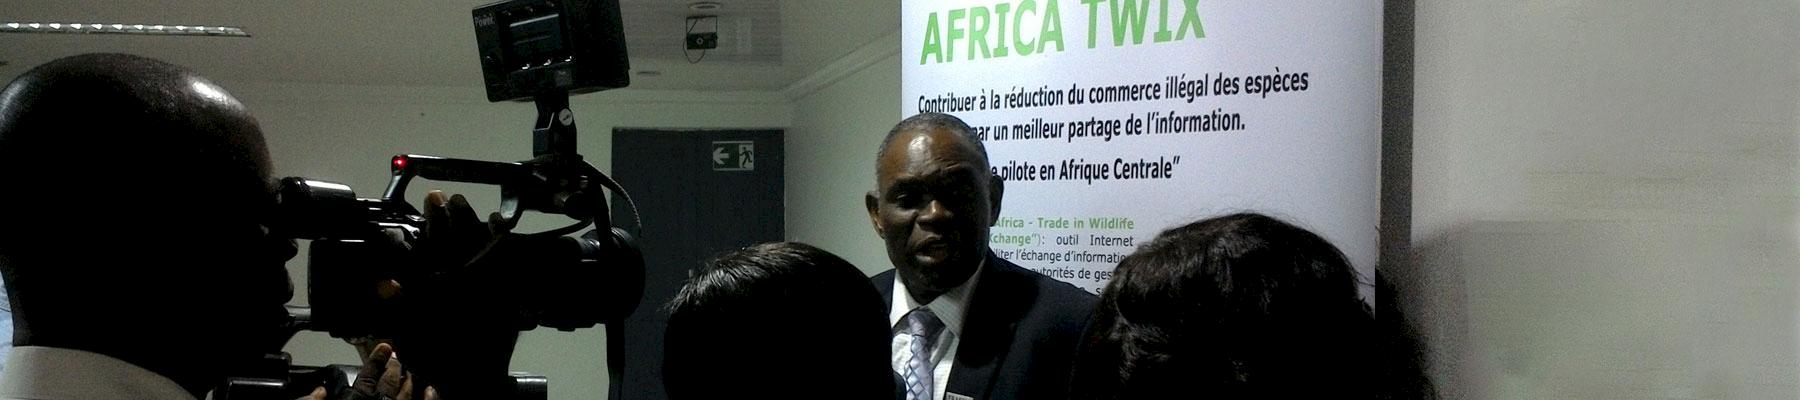 Paulinus interviewed at the launch of AFRICA-TWIX